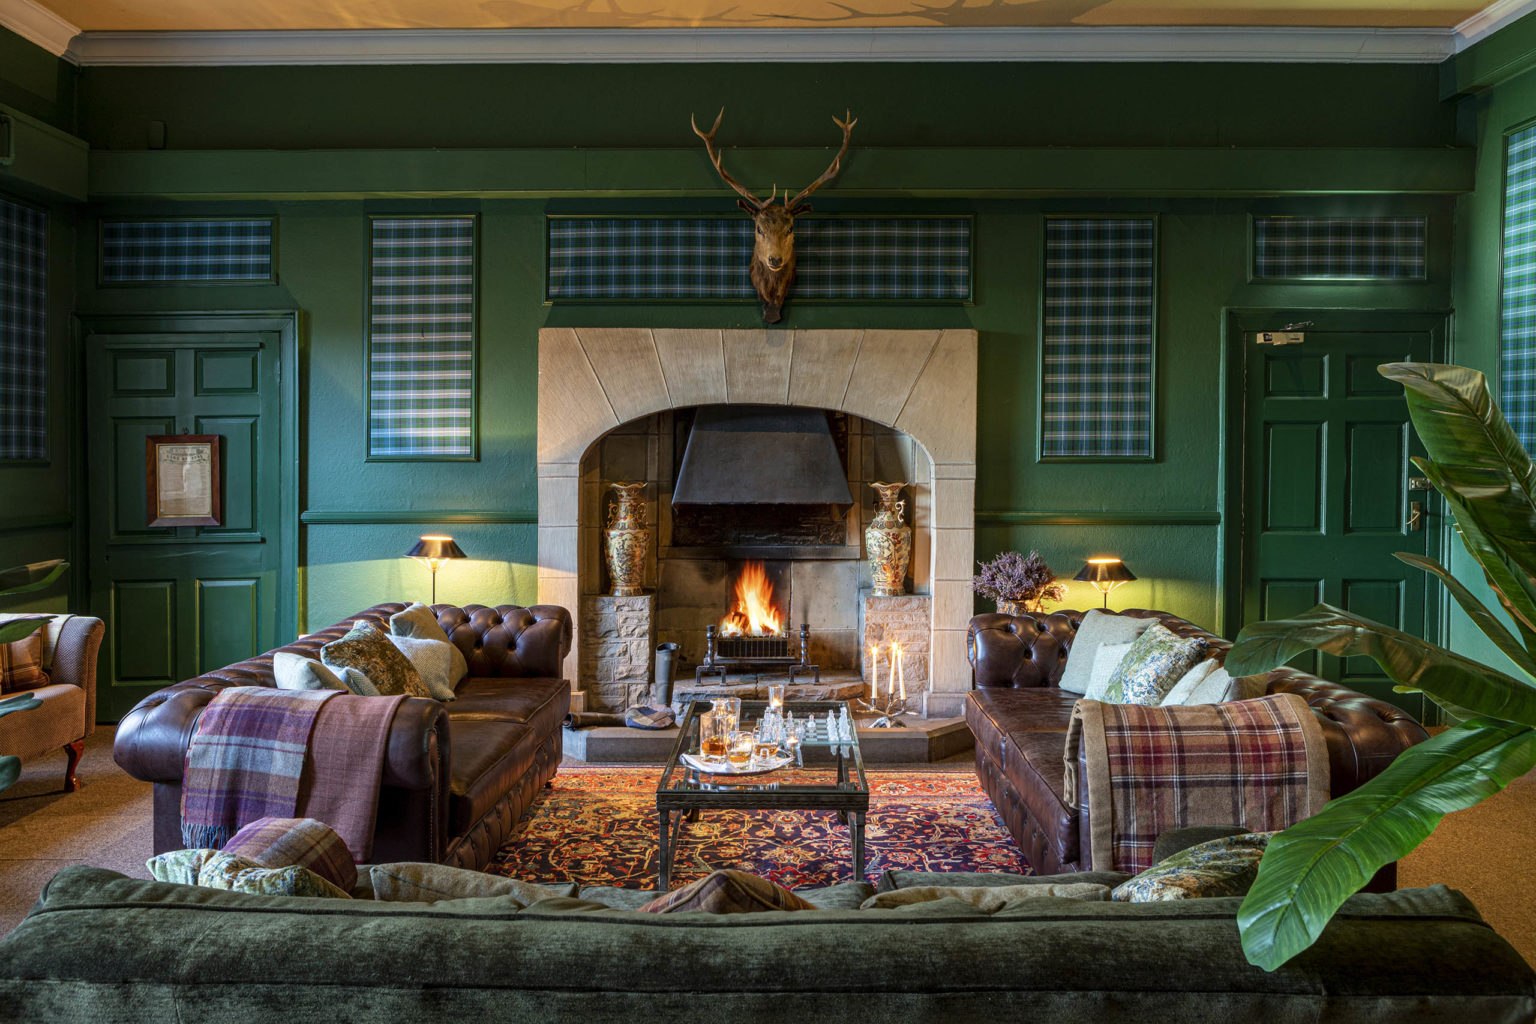 Sofas and fireplace in the Billiards Room at Swinton Park castle hotel on the Swinton Estate near Harrogate and the Yorkshire Dales